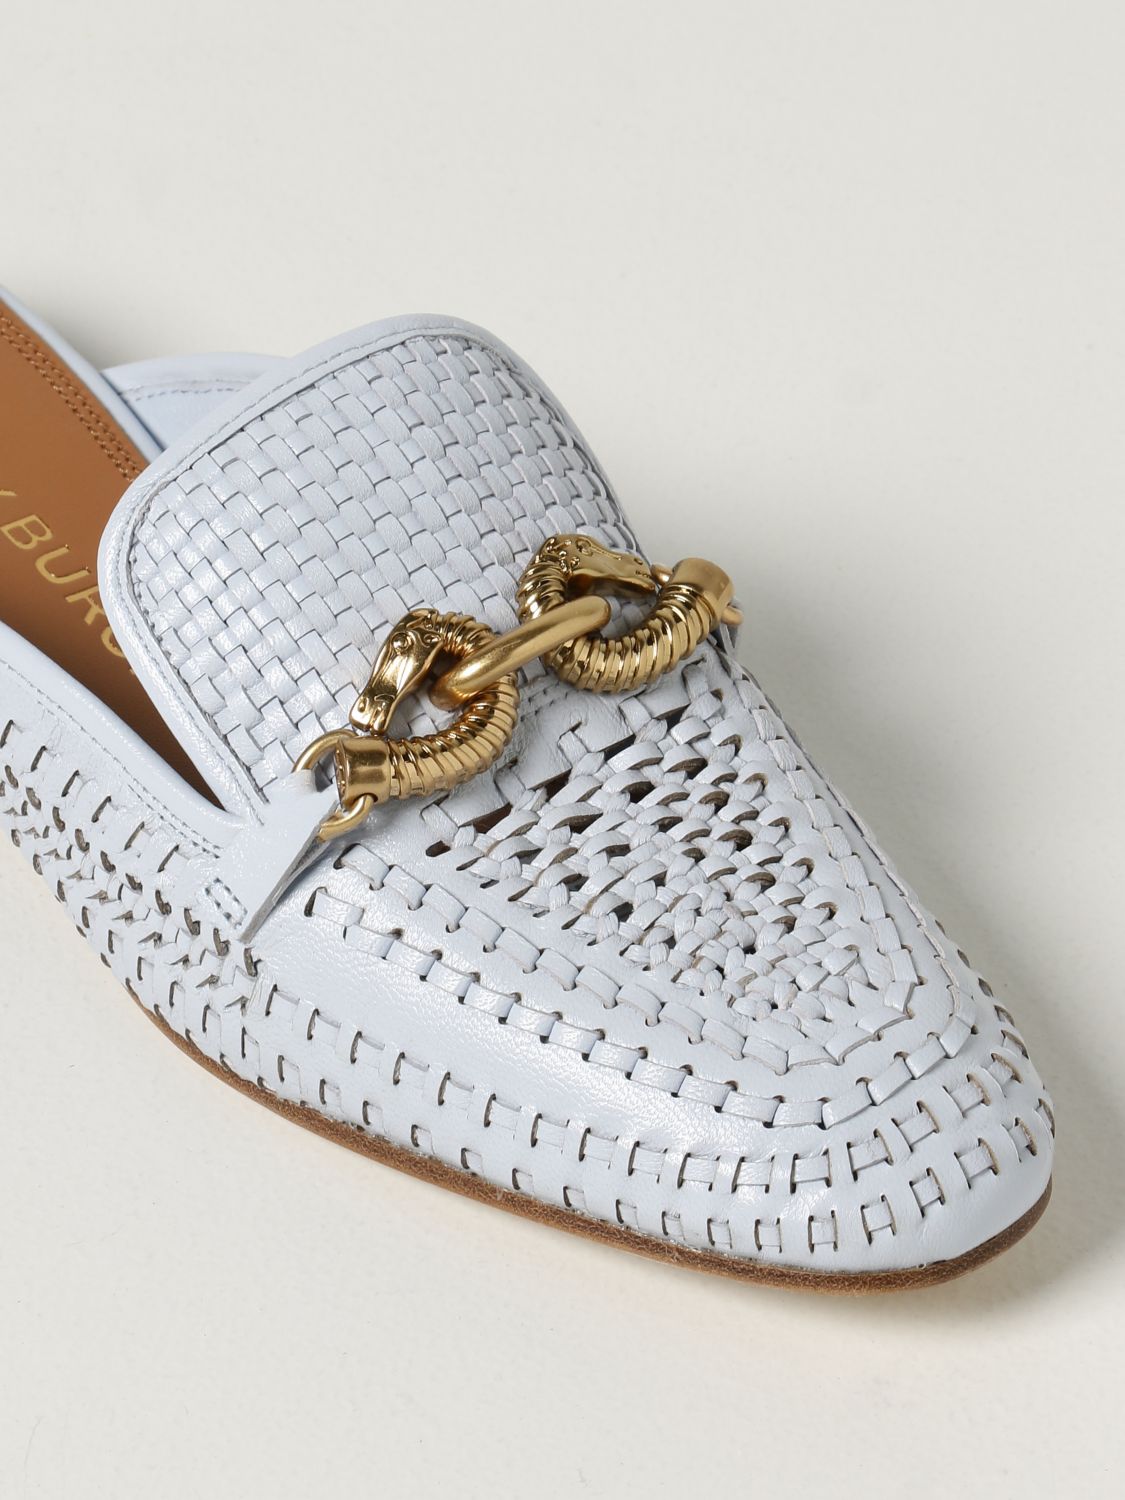 Flat shoes Tory Burch: Jessa Tory Burch sabots in woven leather blue 4